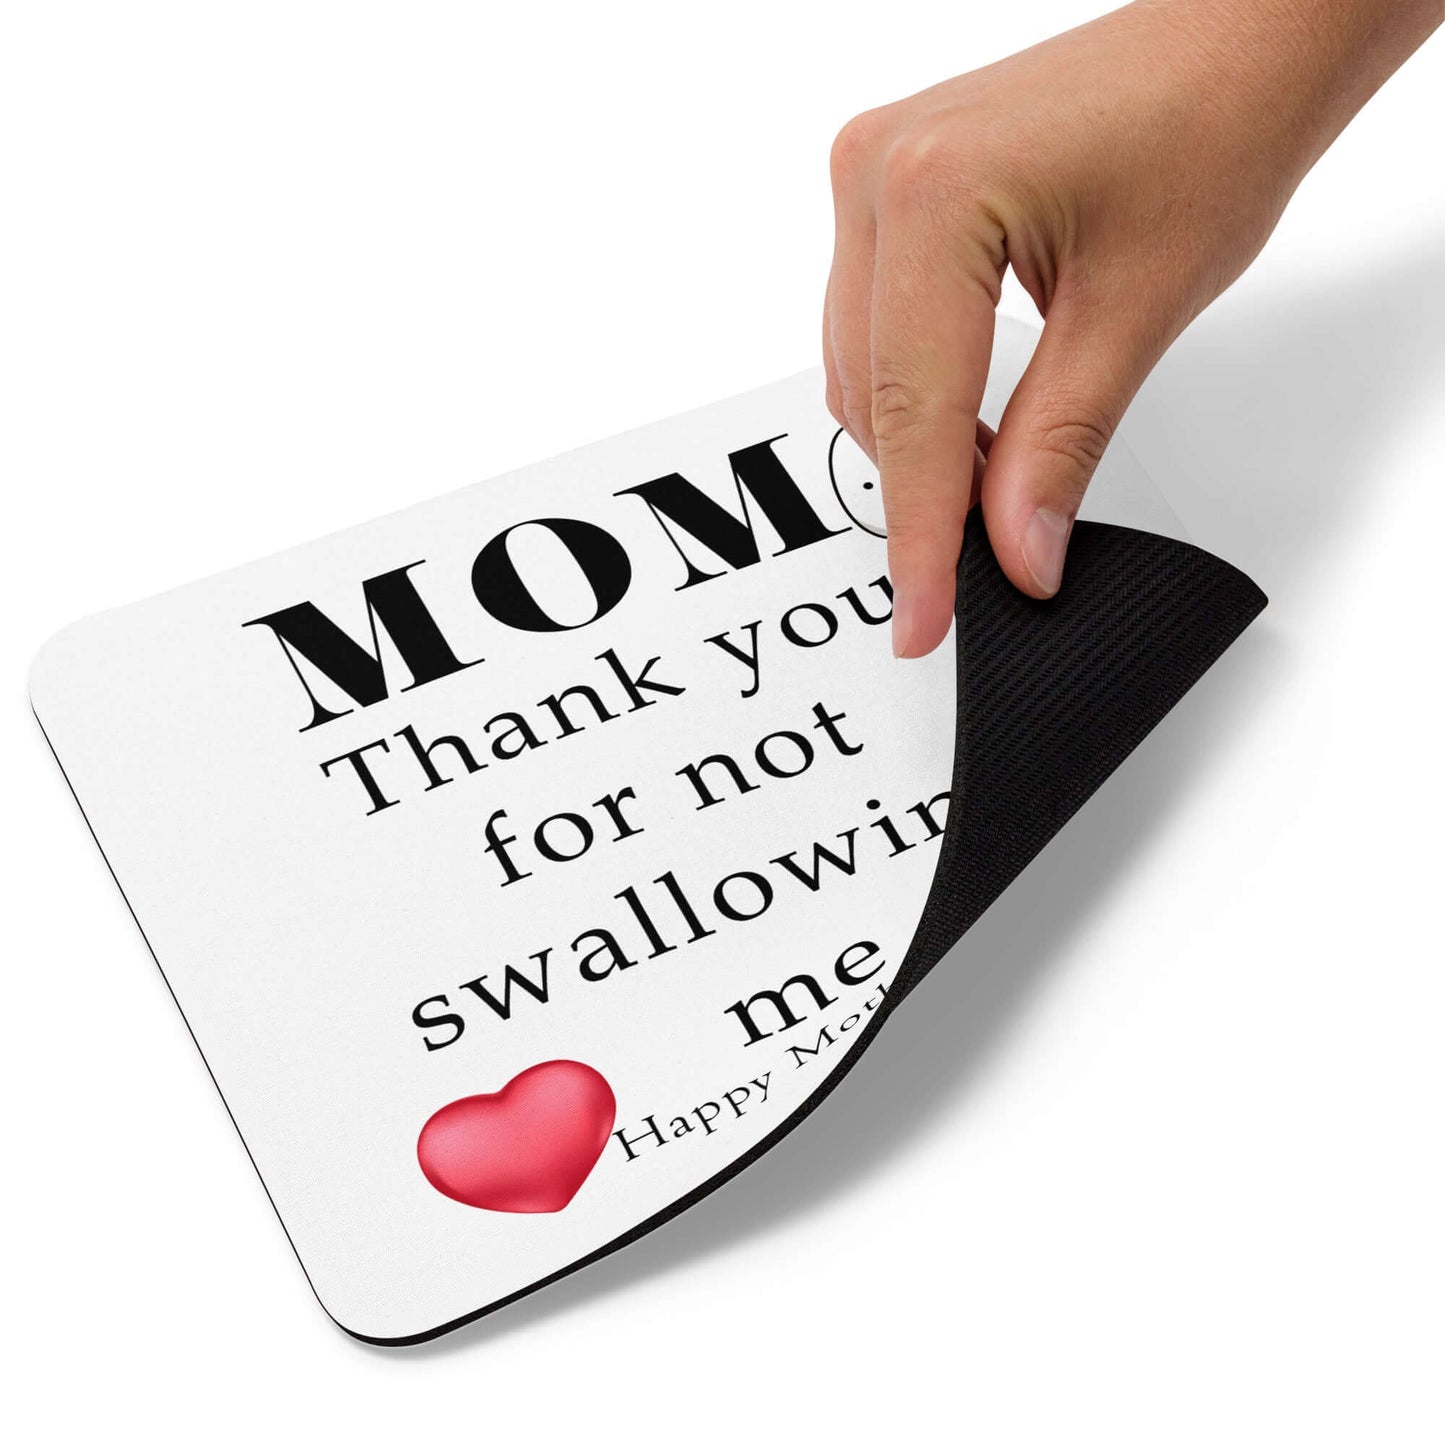 Mom, thank you for not swallowing me - Mouse pad blow job computer funny mothers day gift for mom mom moms day moms gift mothers day mouse mouse pad swallow